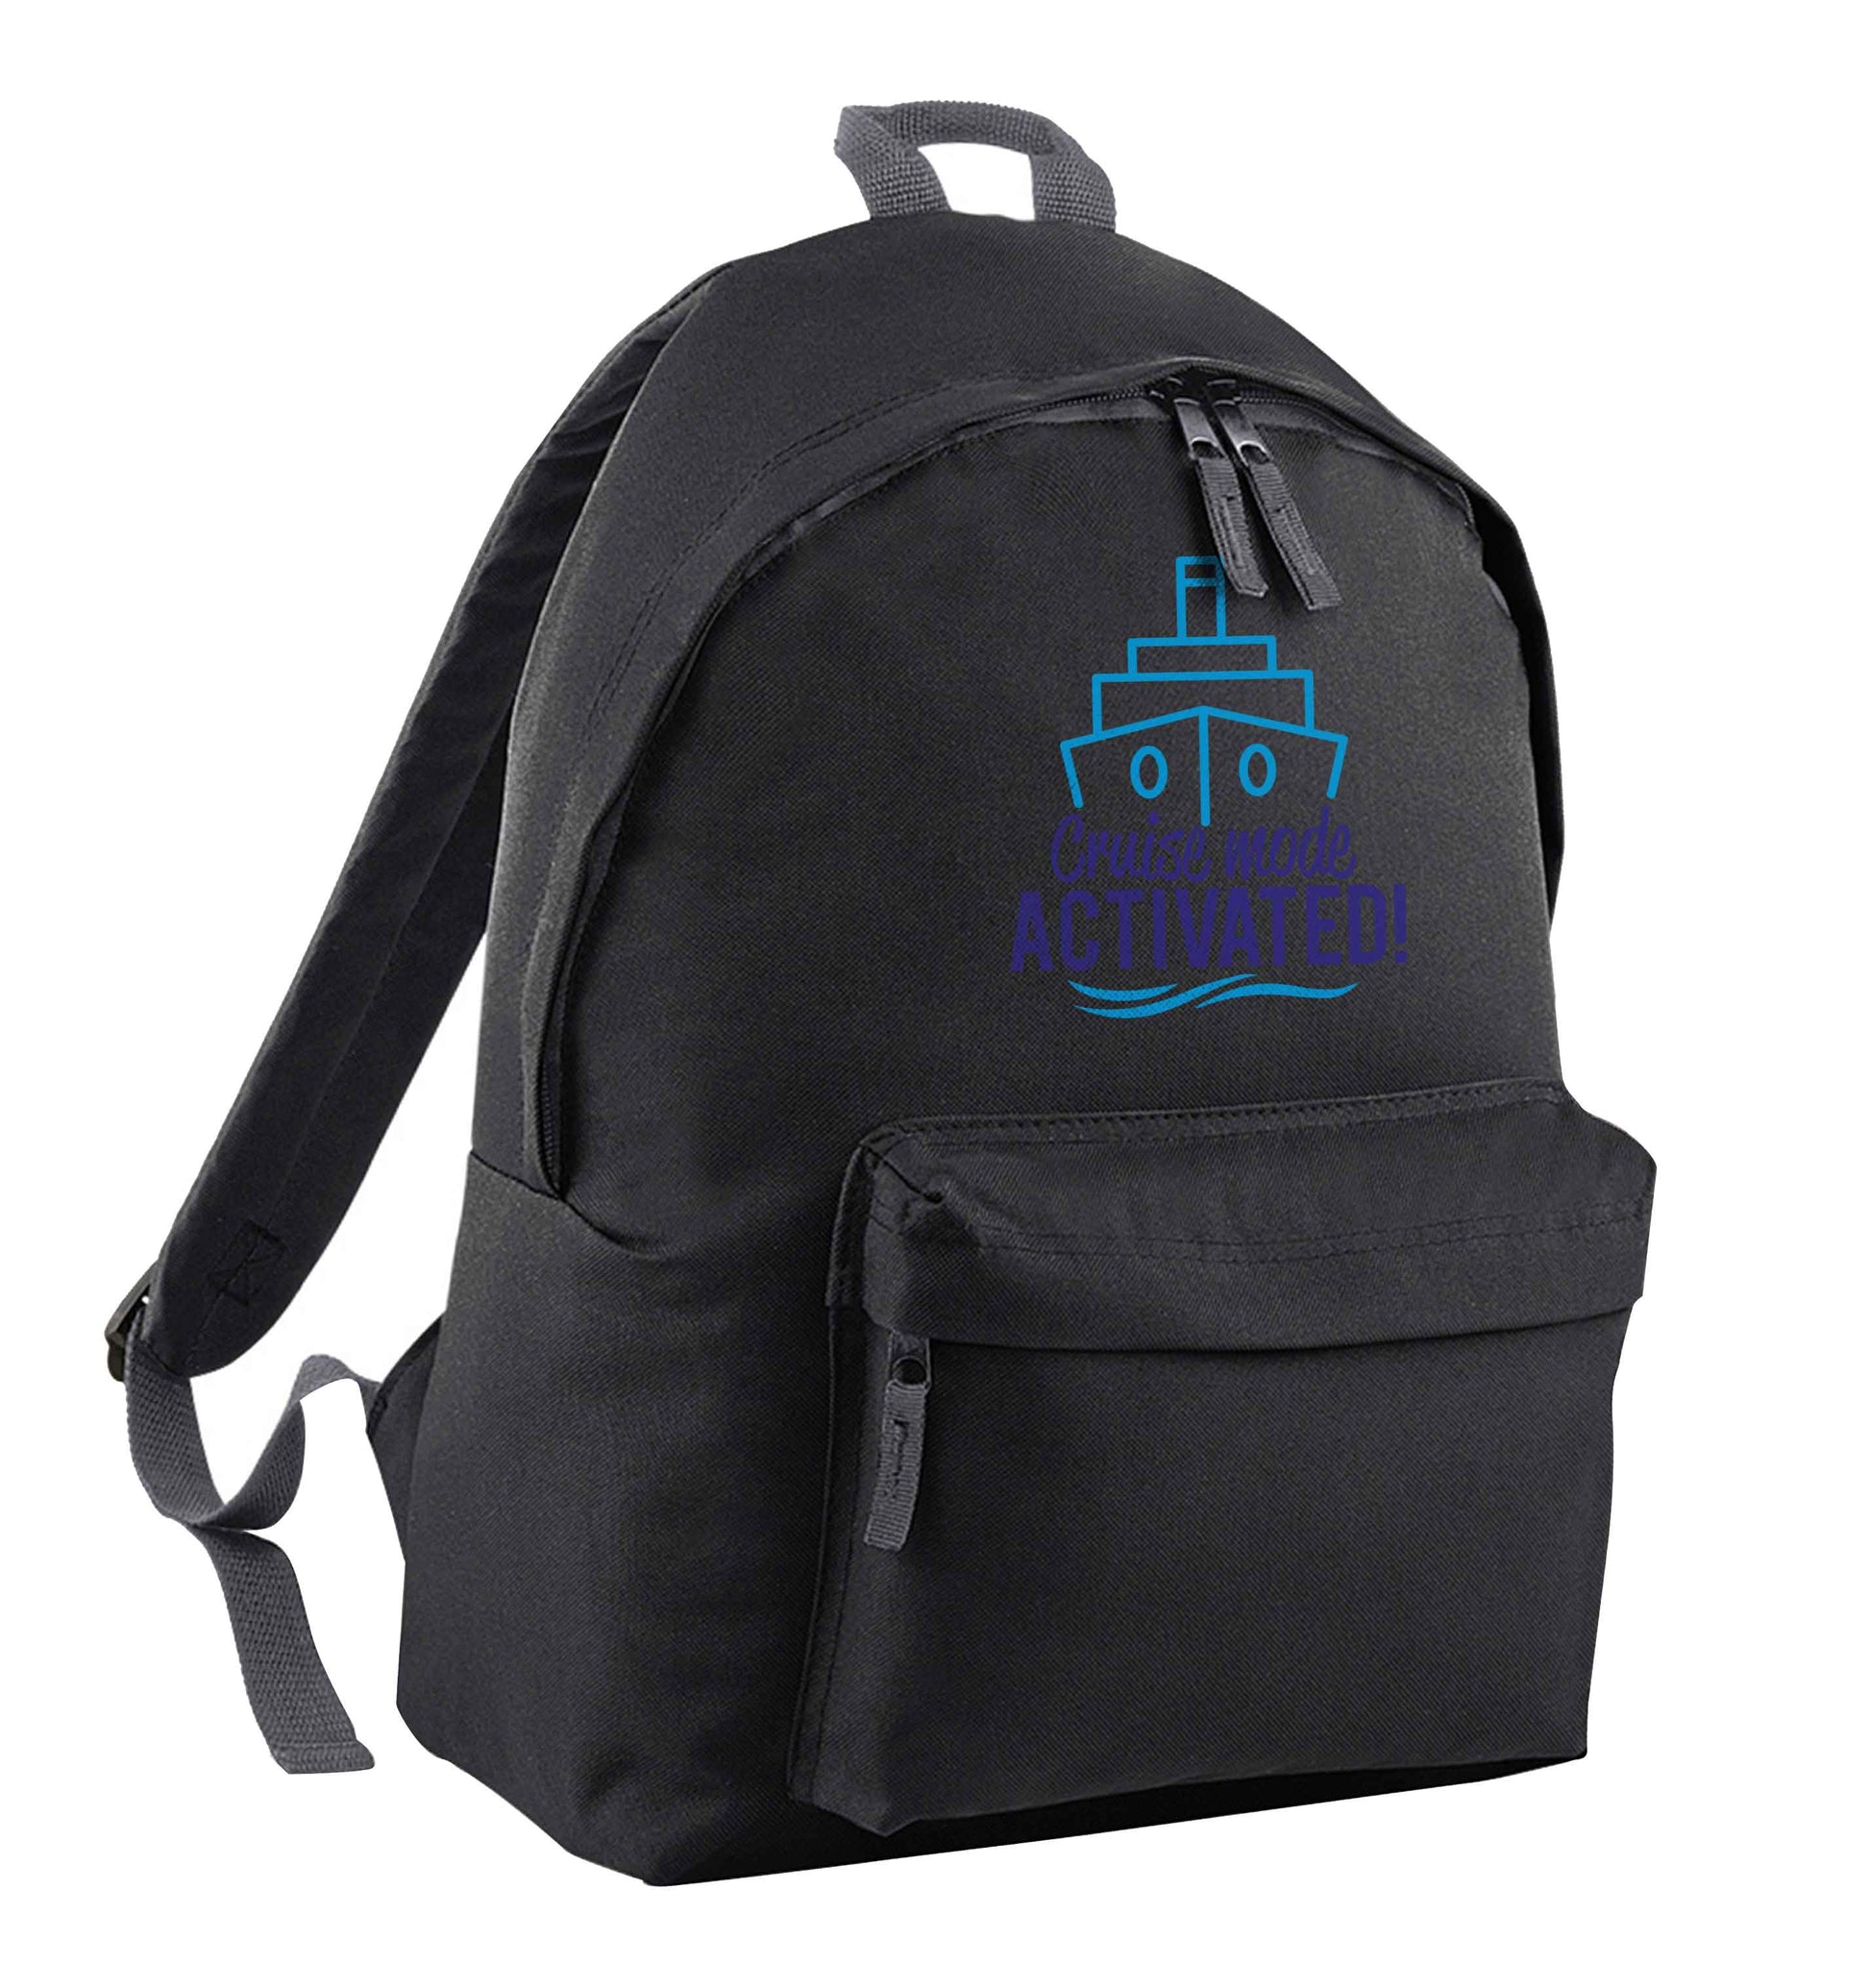 Cruise mode activated black children's backpack